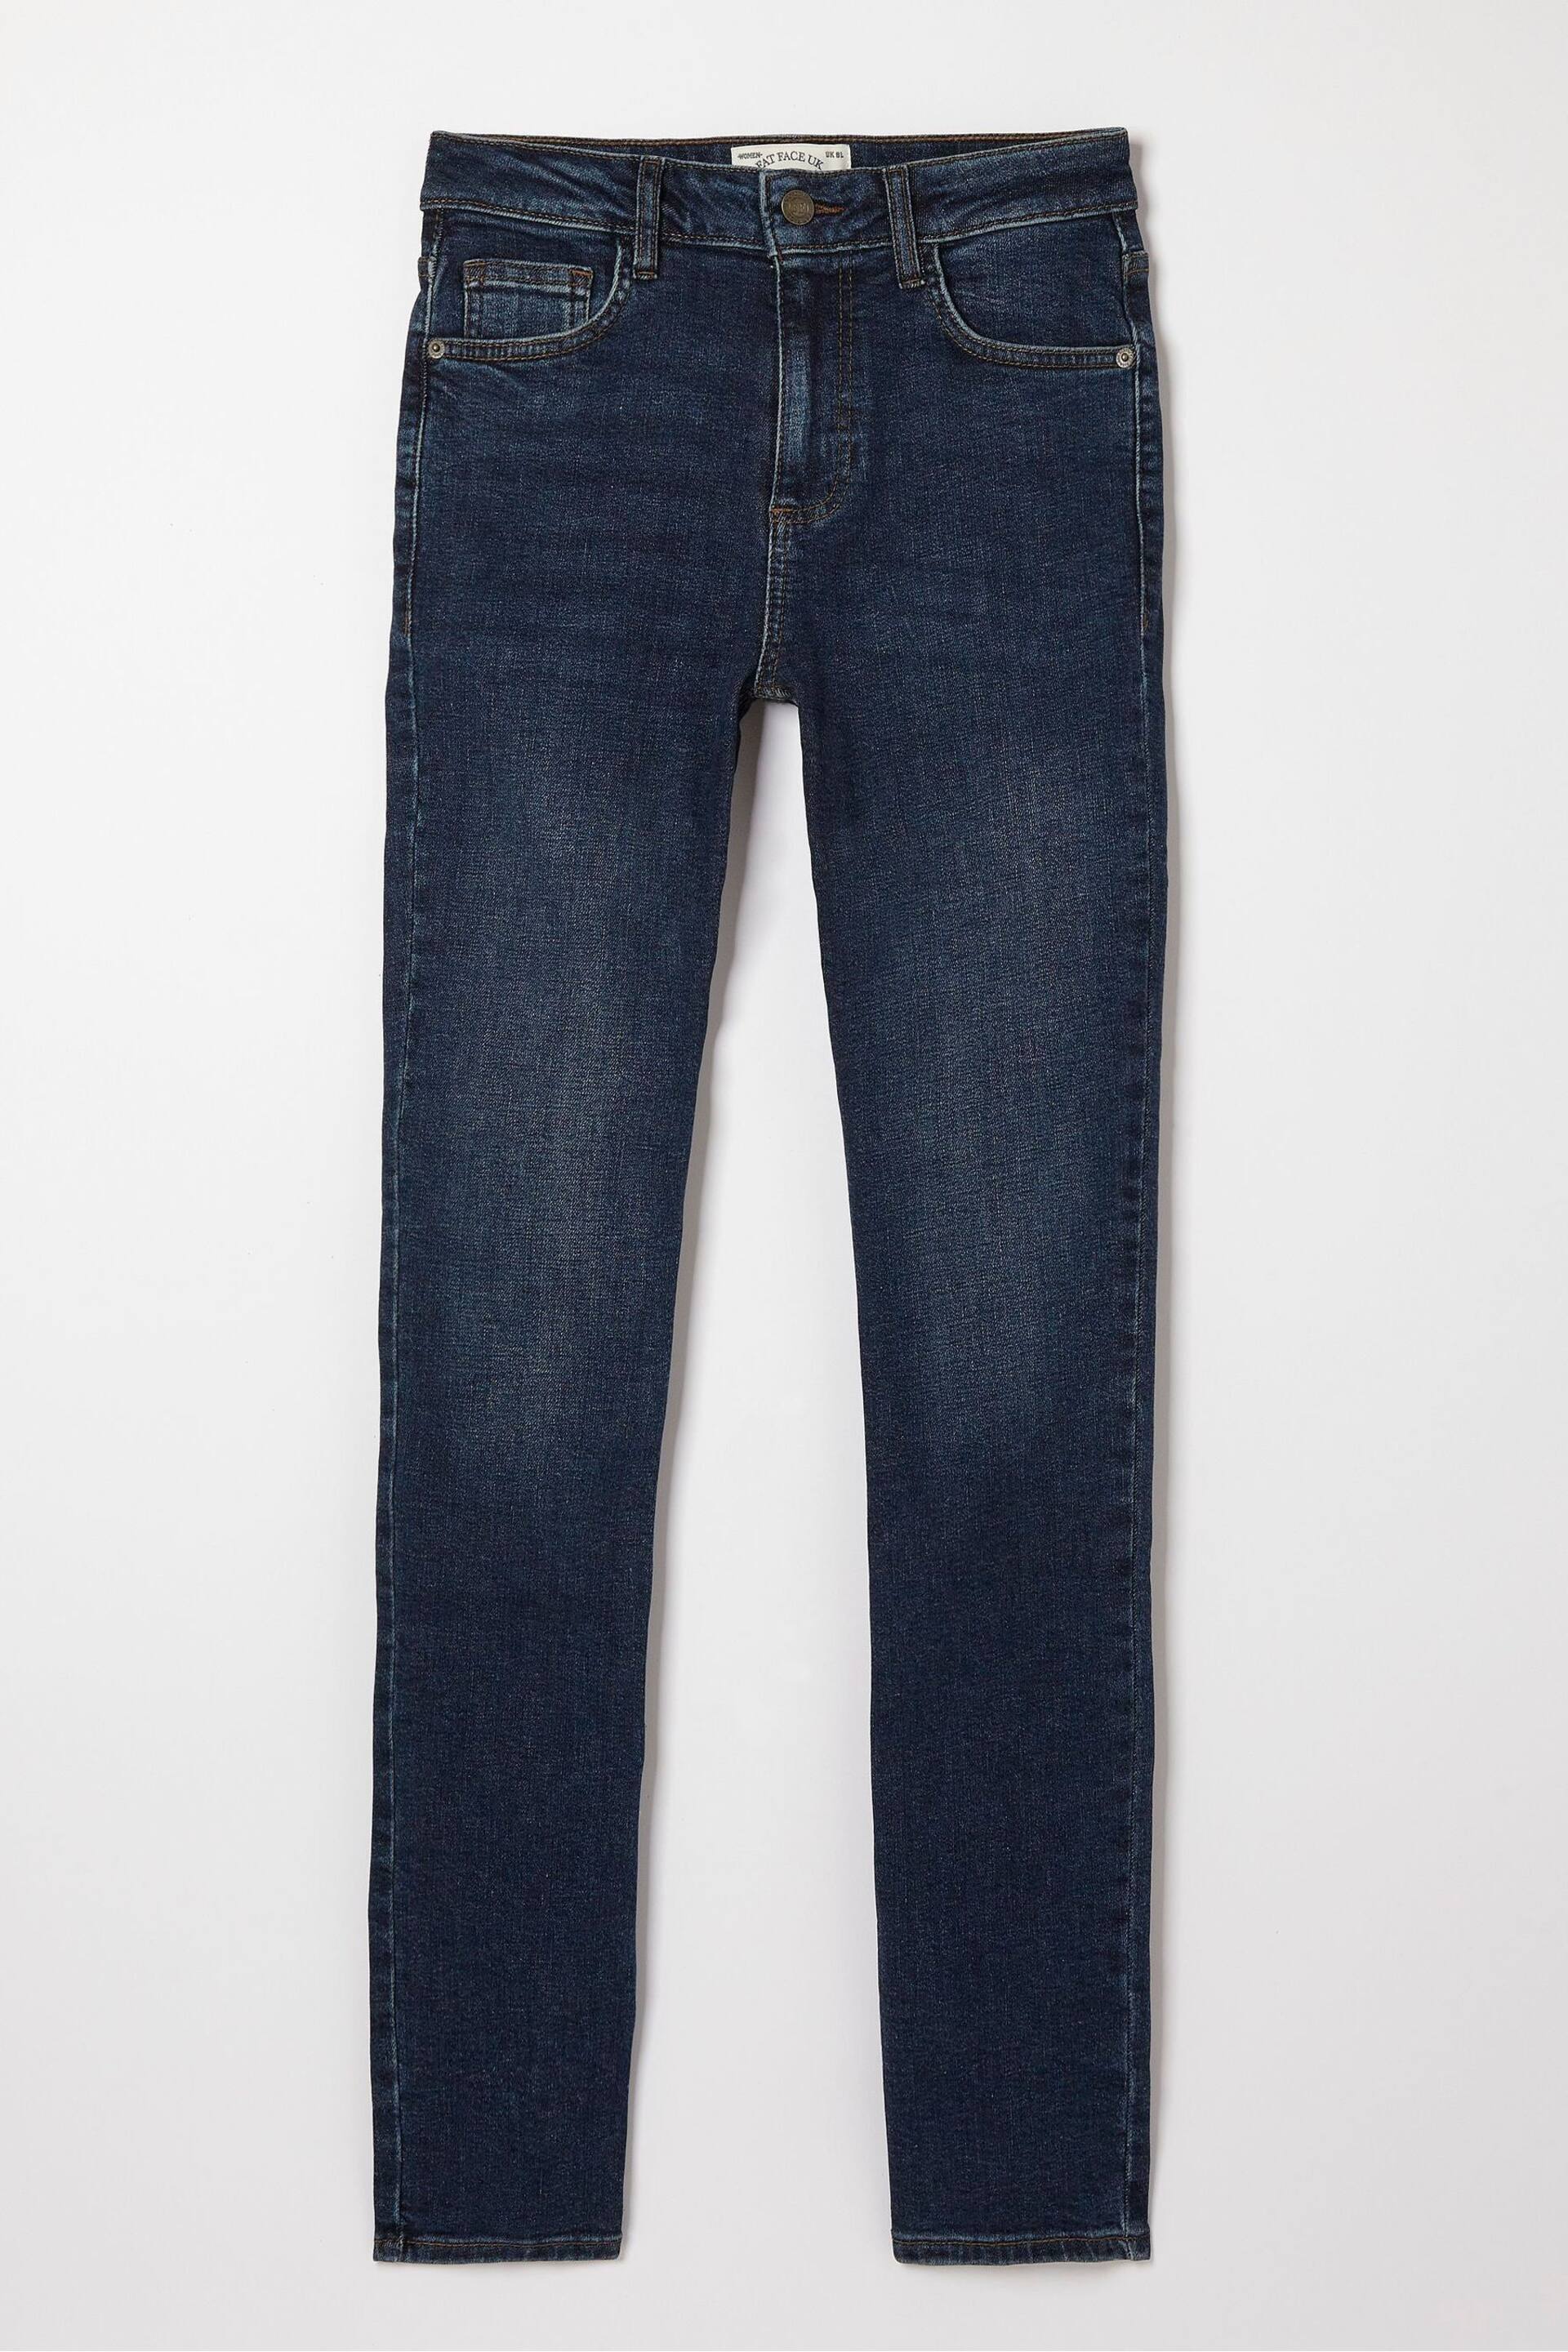 FatFace Blue Sway Slim Jeans - Image 4 of 4